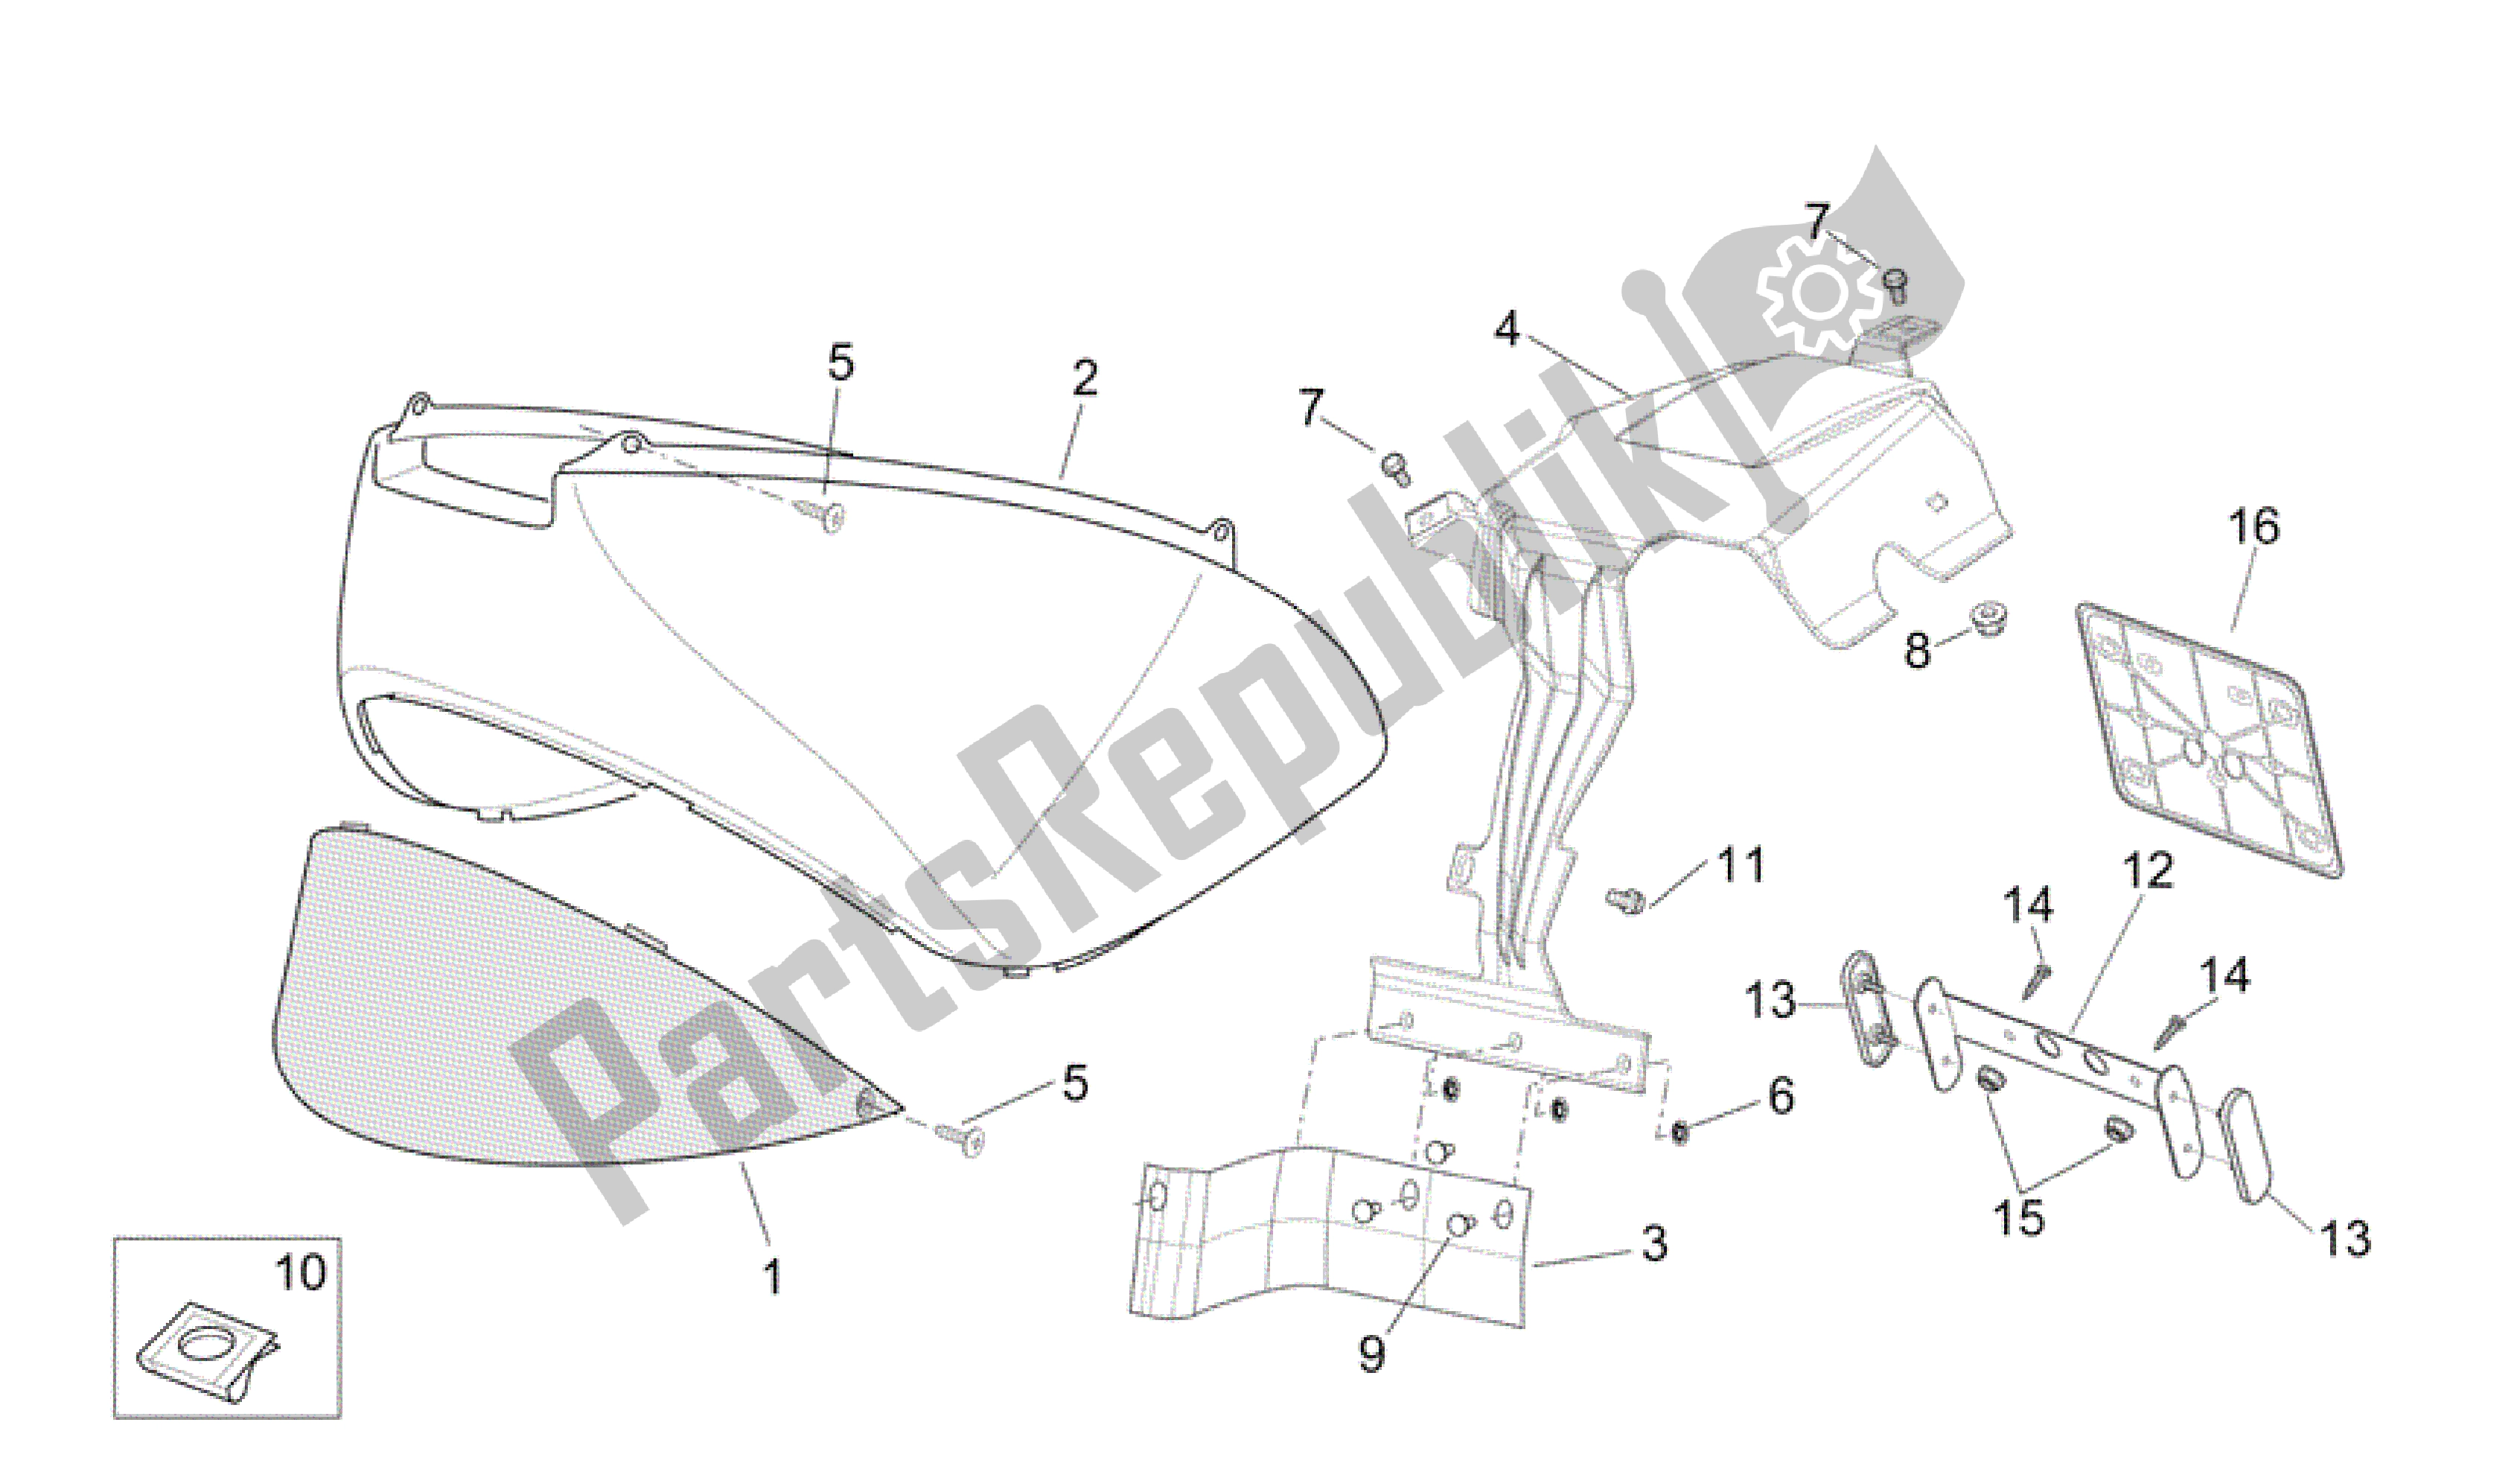 All parts for the Rear Body I of the Aprilia Scarabeo 125 2004 - 2006